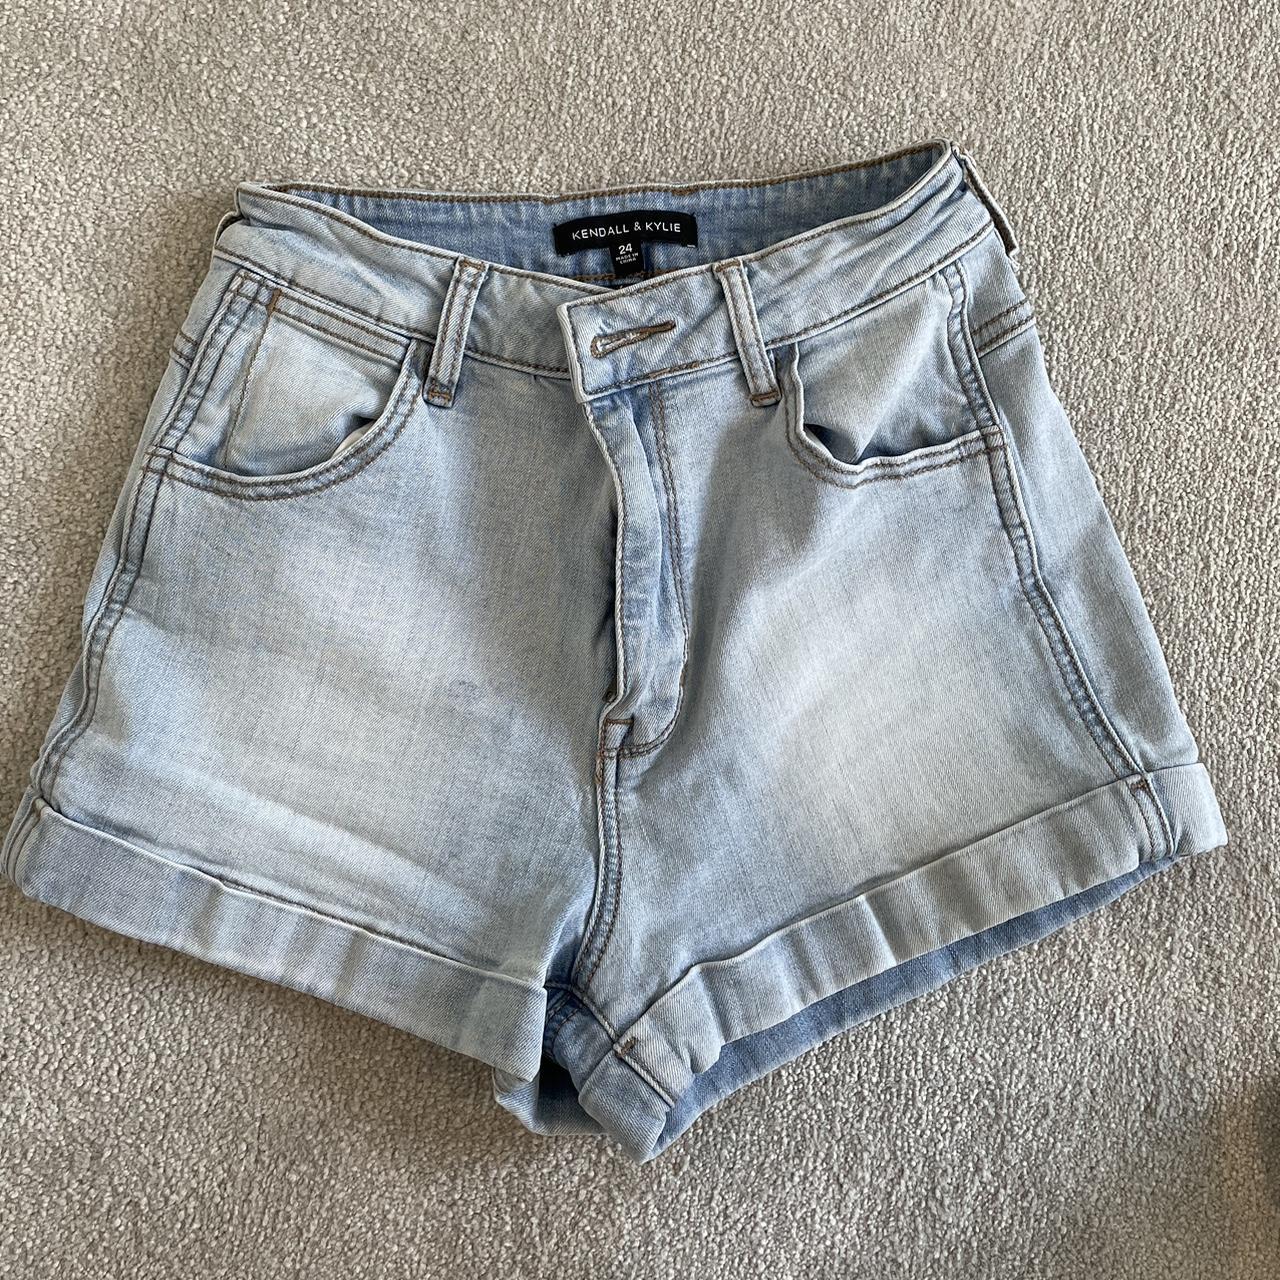 Kendall and kylie denim shorts. Waist 24 and so so... - Depop